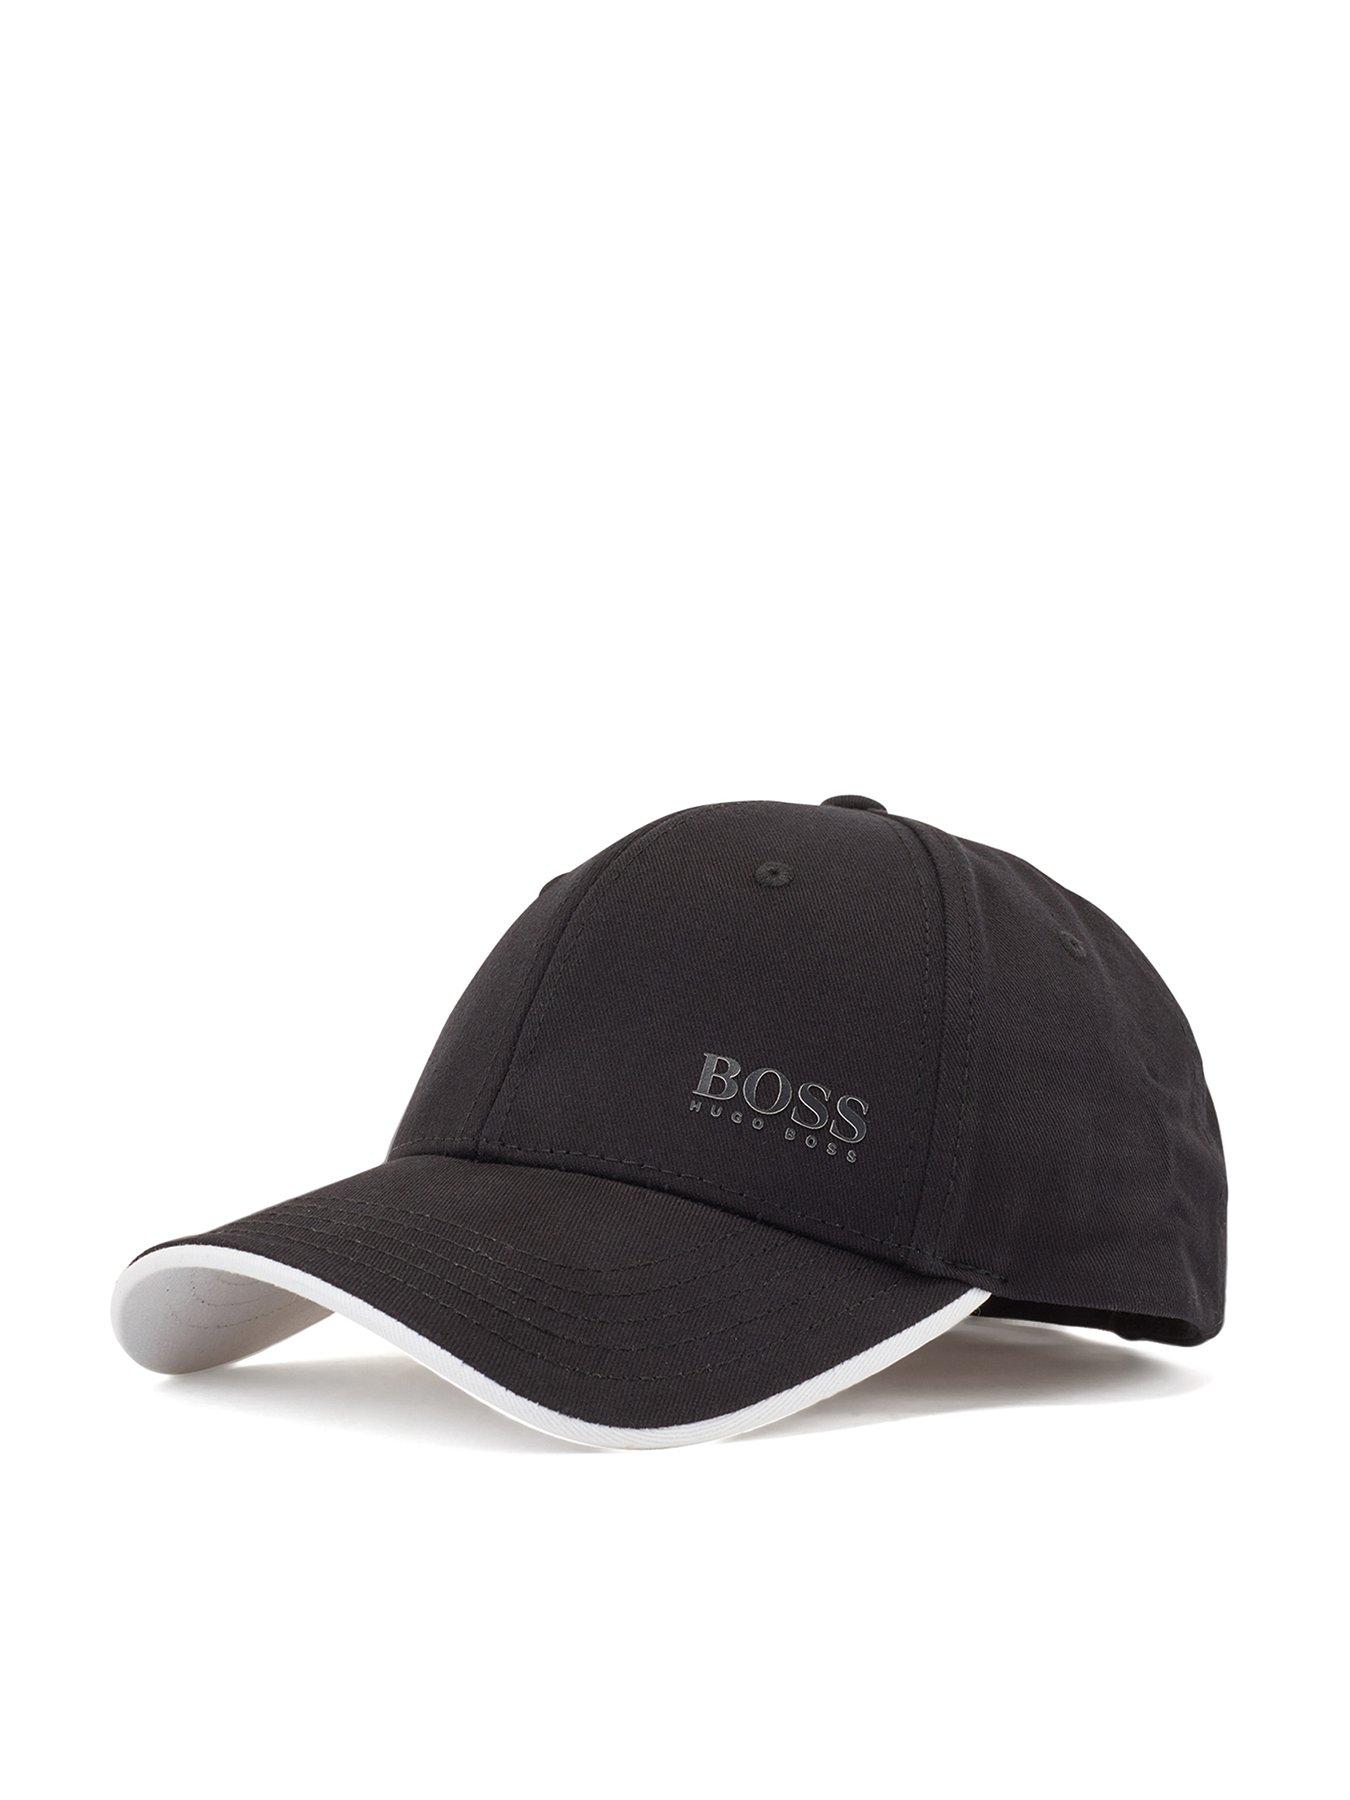 BOSS | Hugo Boss | Next Day Delivery 